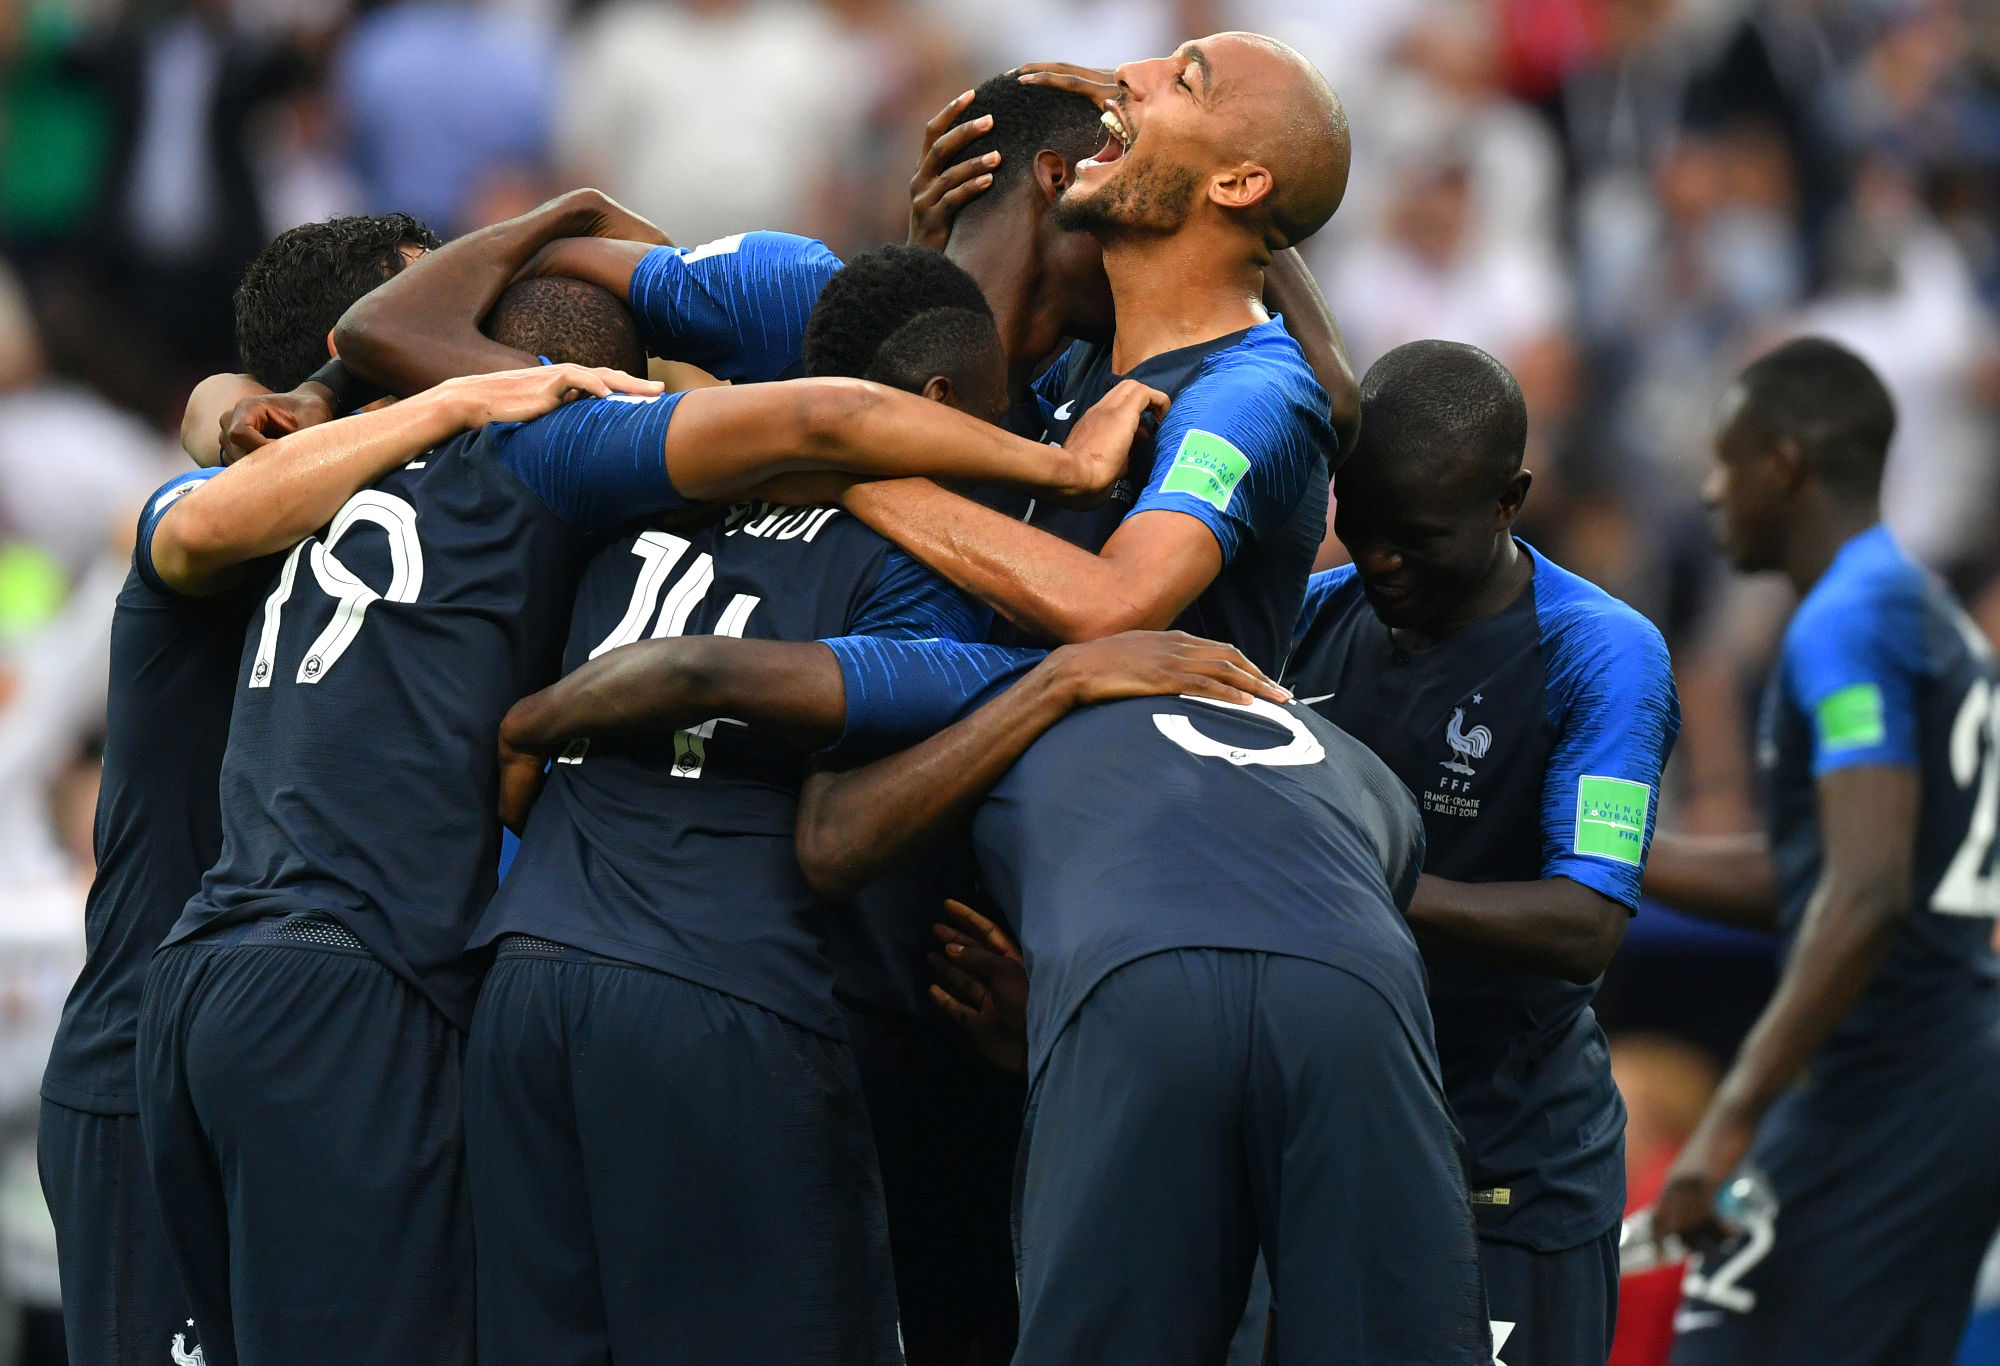 France World Cup